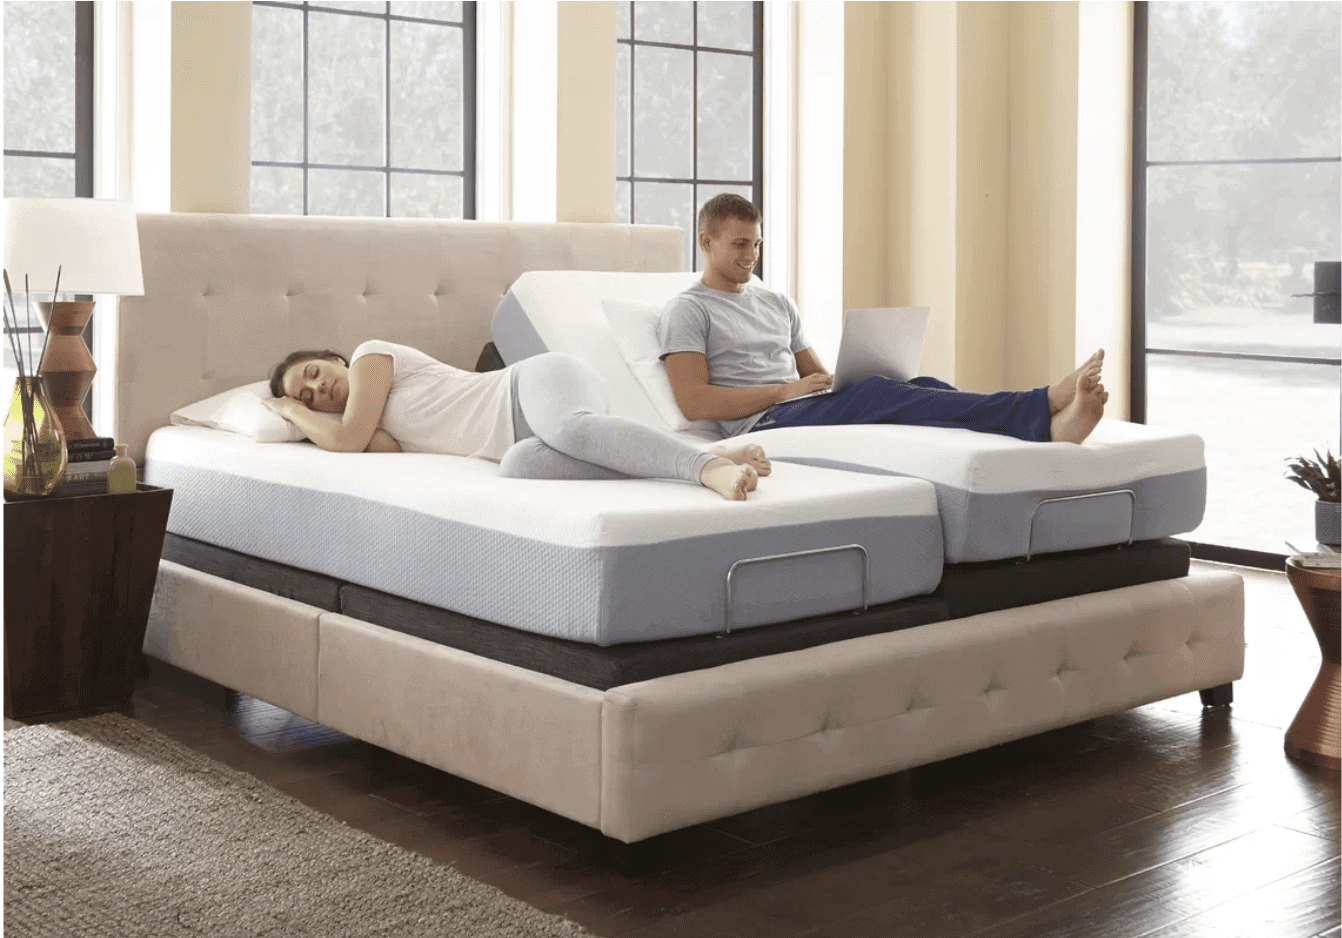 Ready to Upgrade Your Sleep With an Adjustable Bed Base?